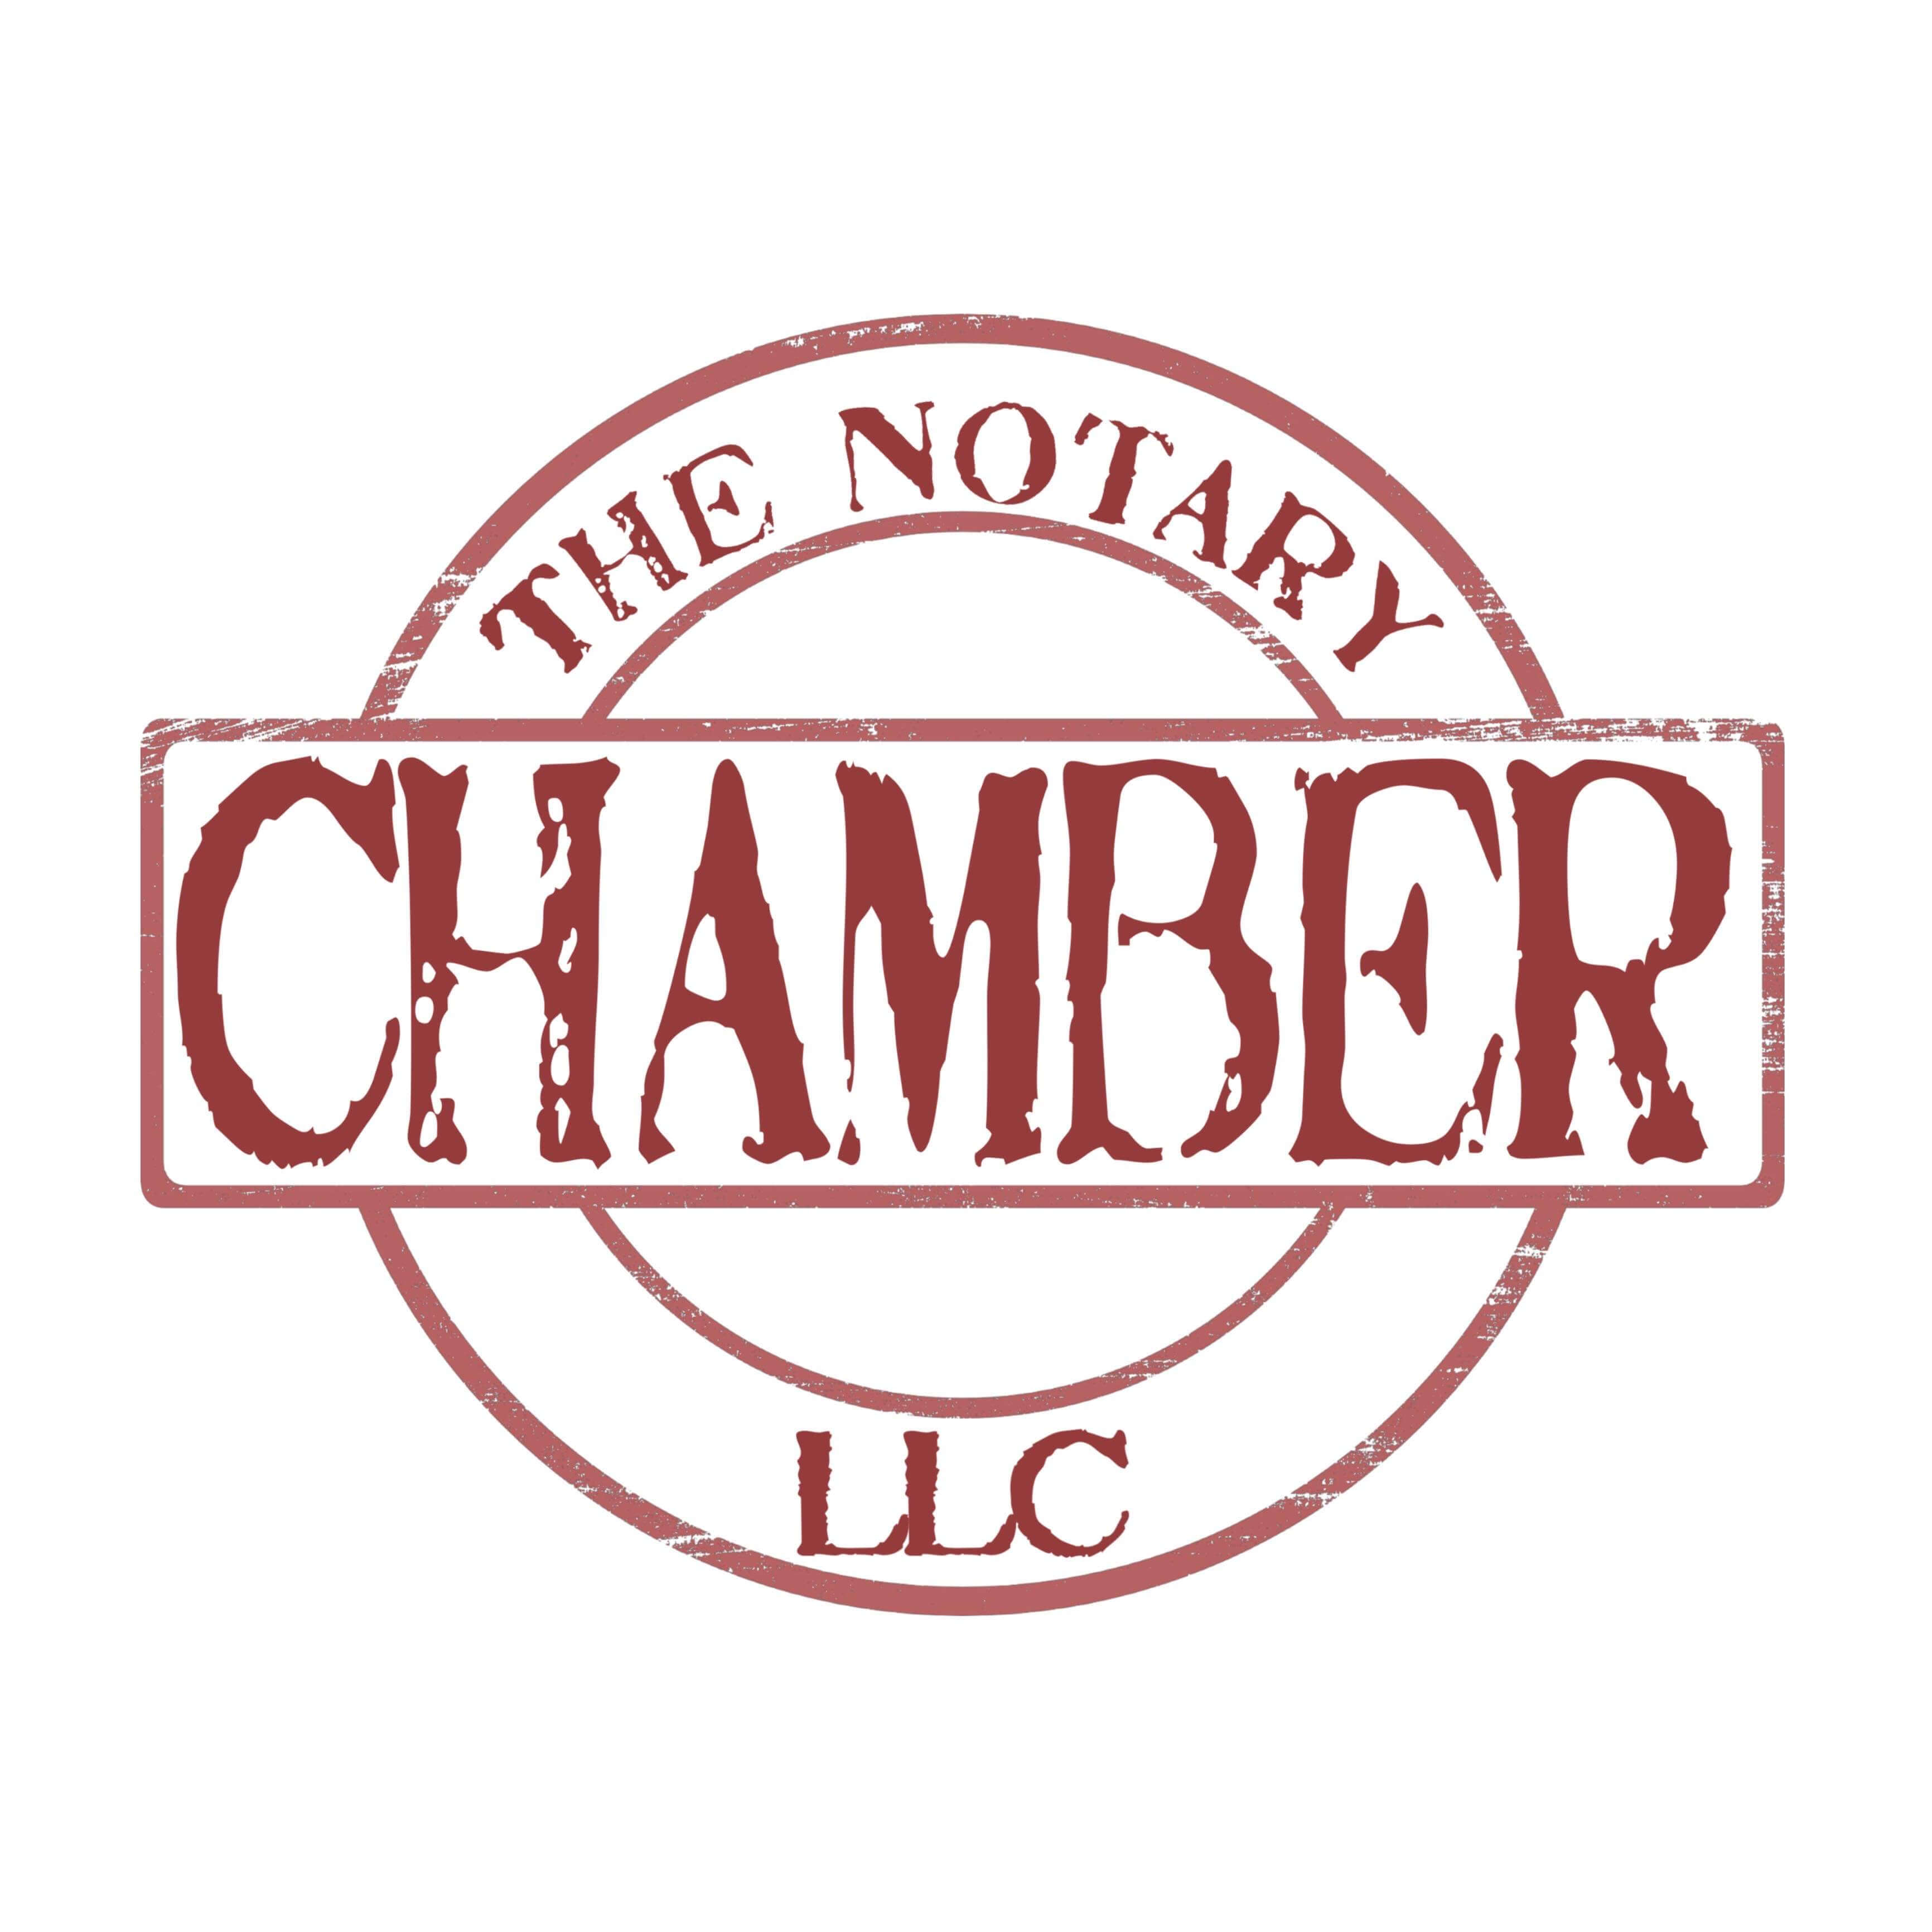 The Notary Chamber